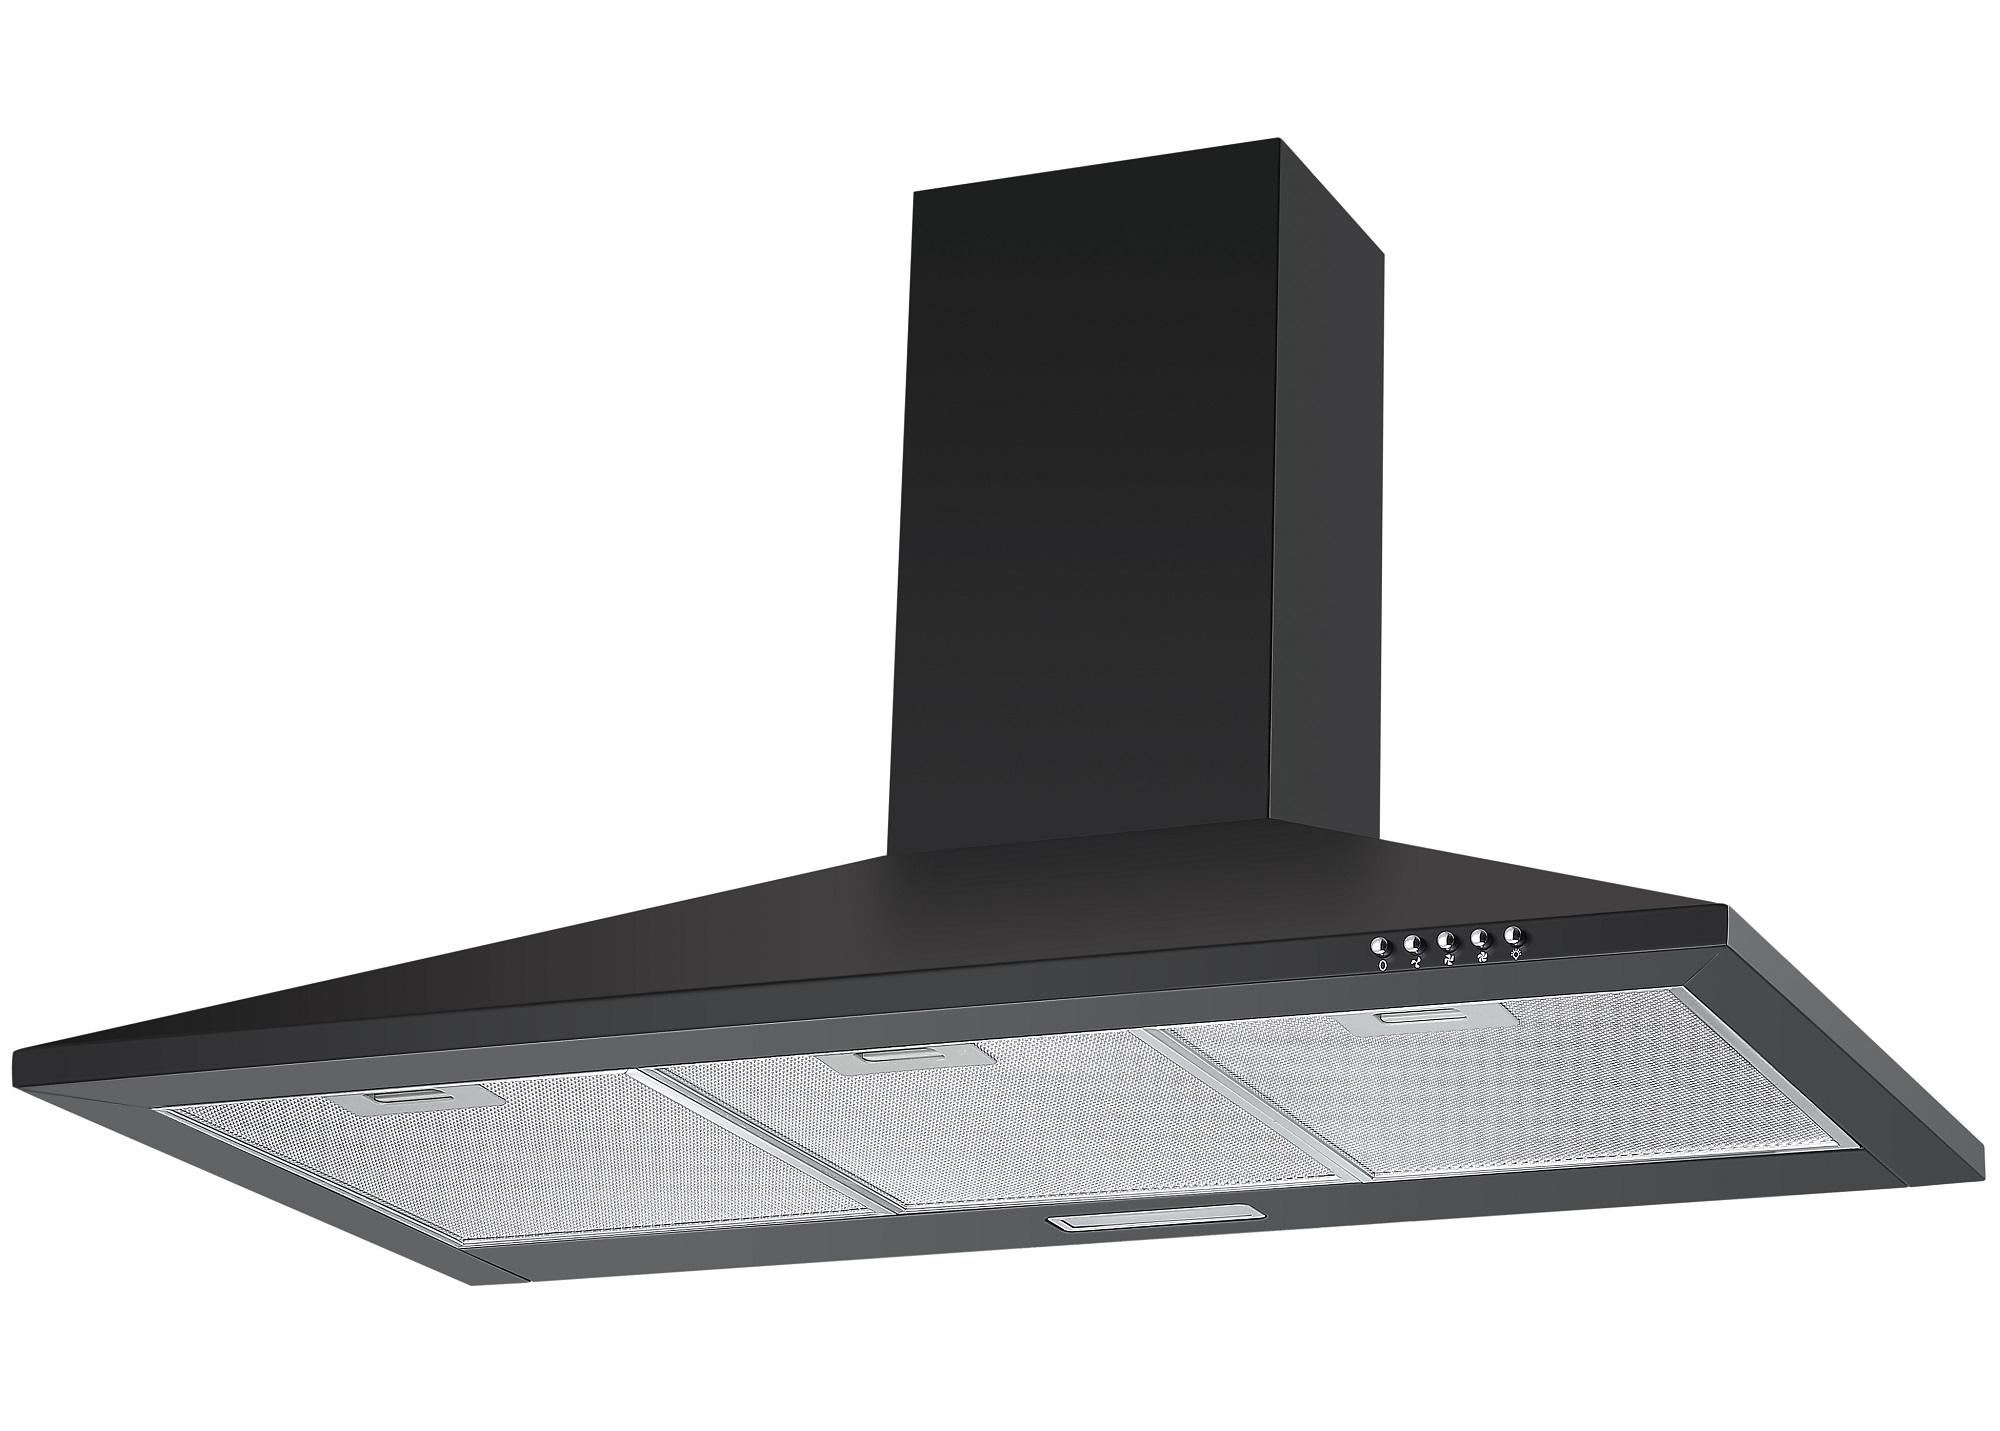 Details About Cookology Ch900bk Kitchen Extractor Fan 90cm Chimney Cooker Hood In Black regarding sizing 2000 X 1431